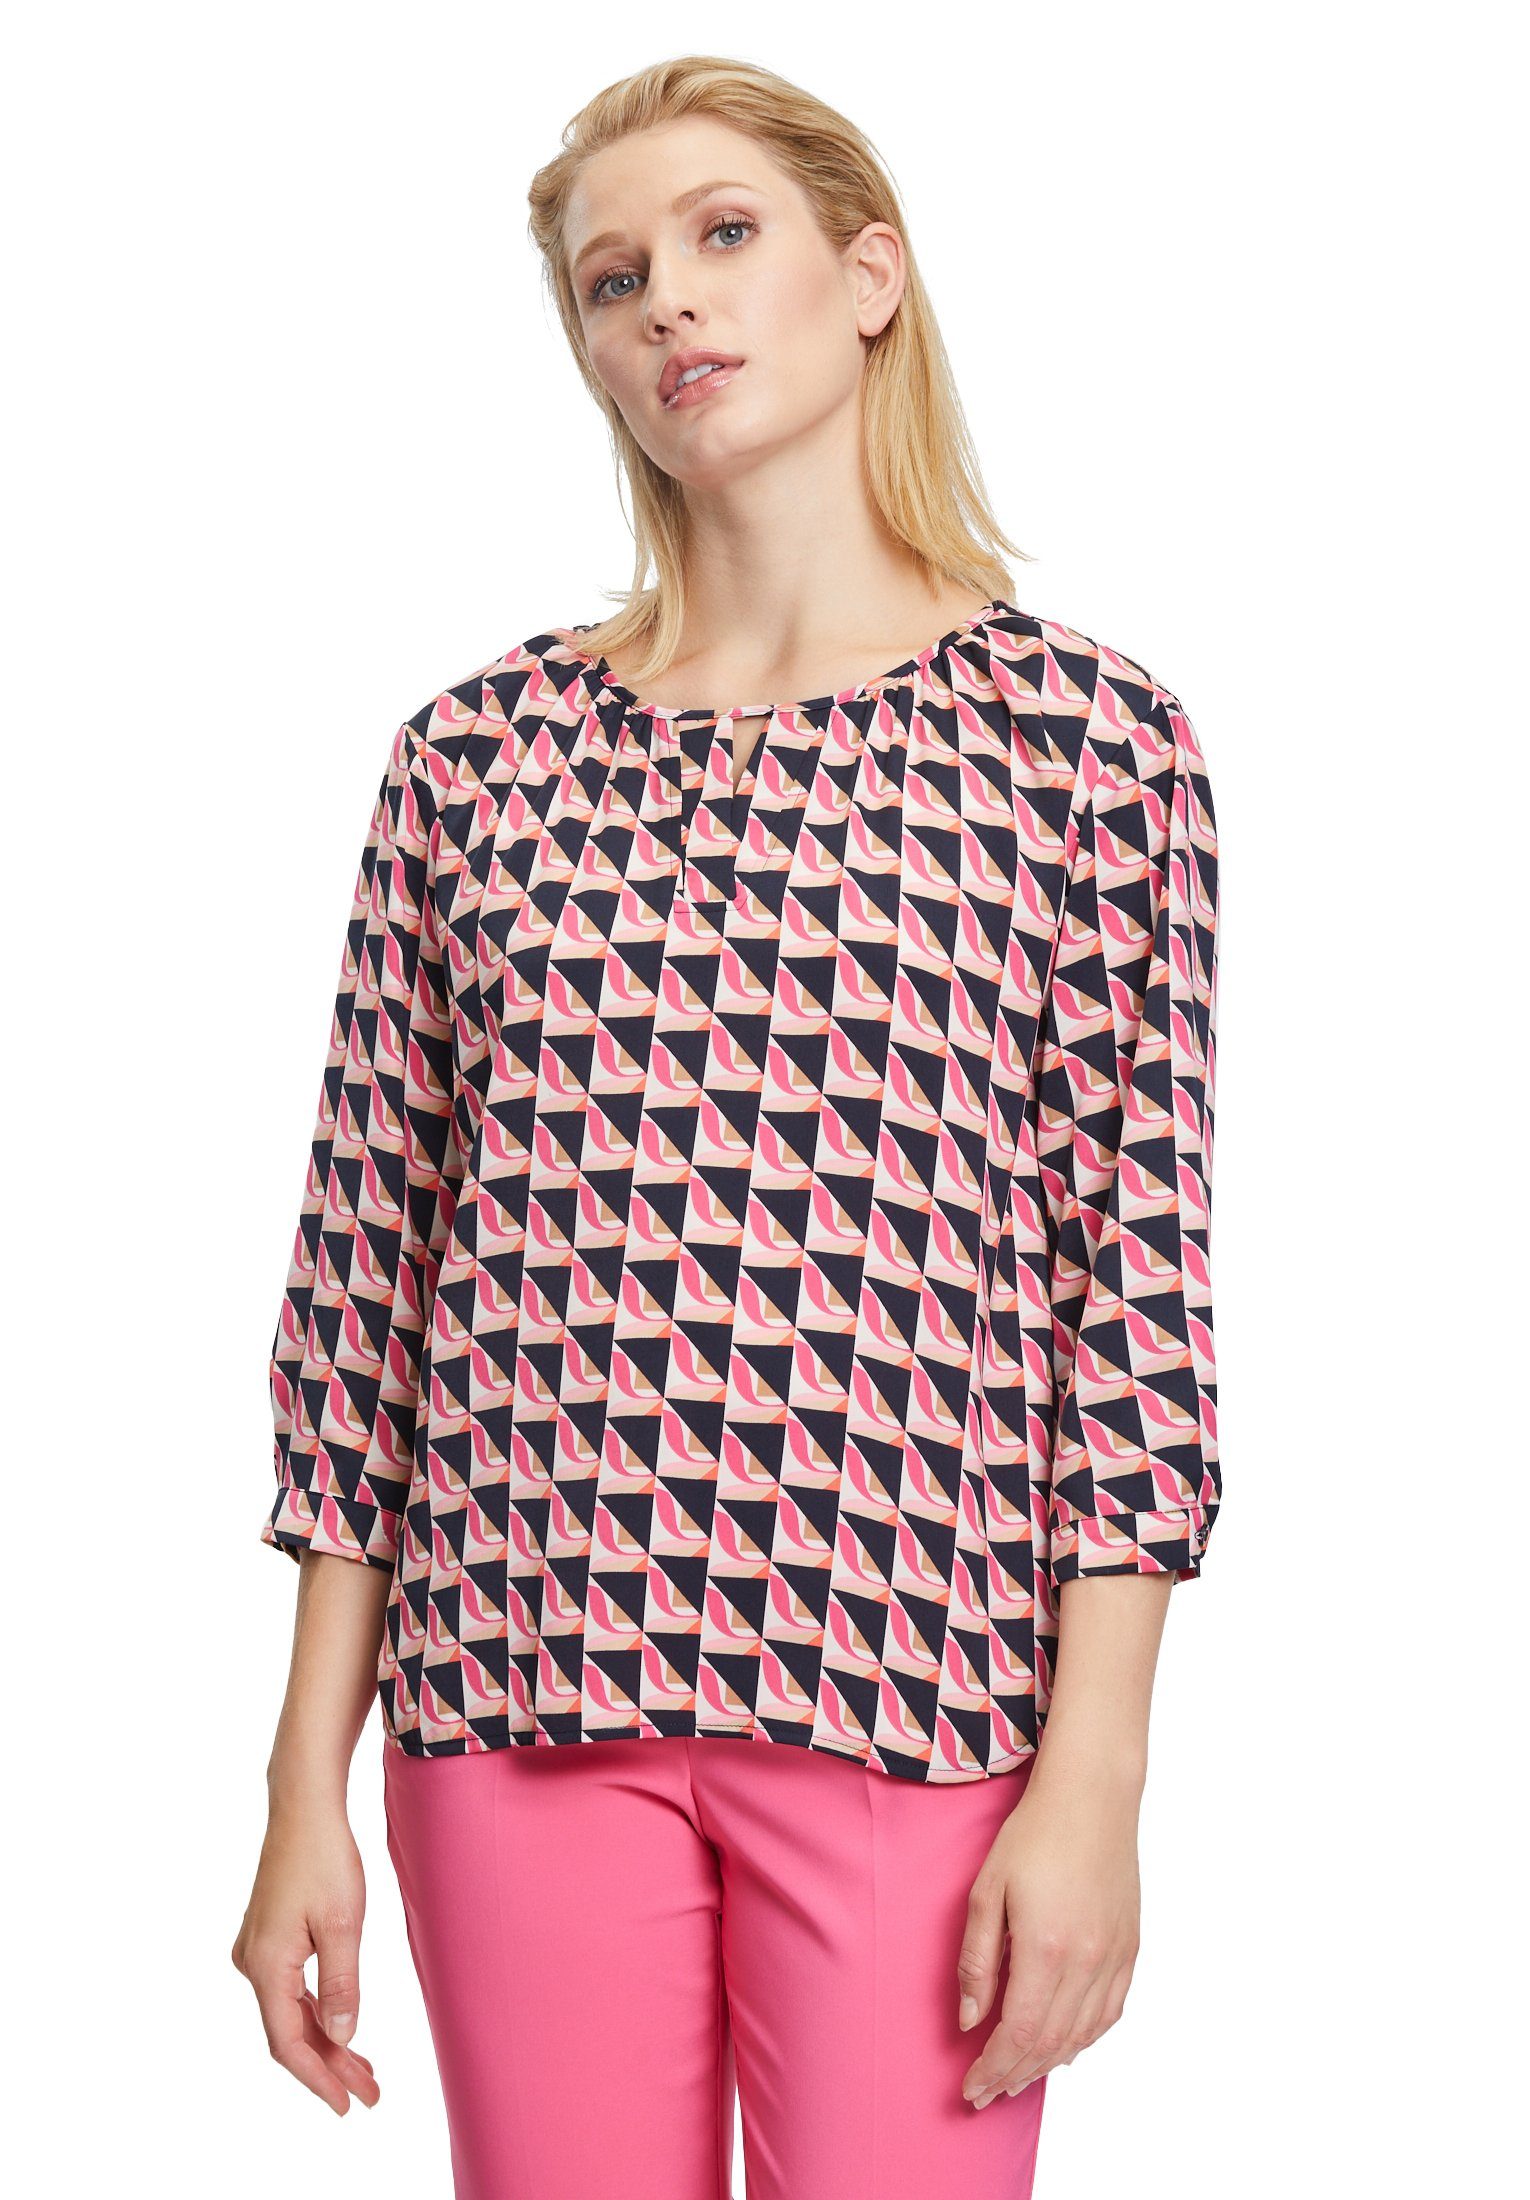 Betty Barclay Bluse Klassische Rosa Muster mit Muster